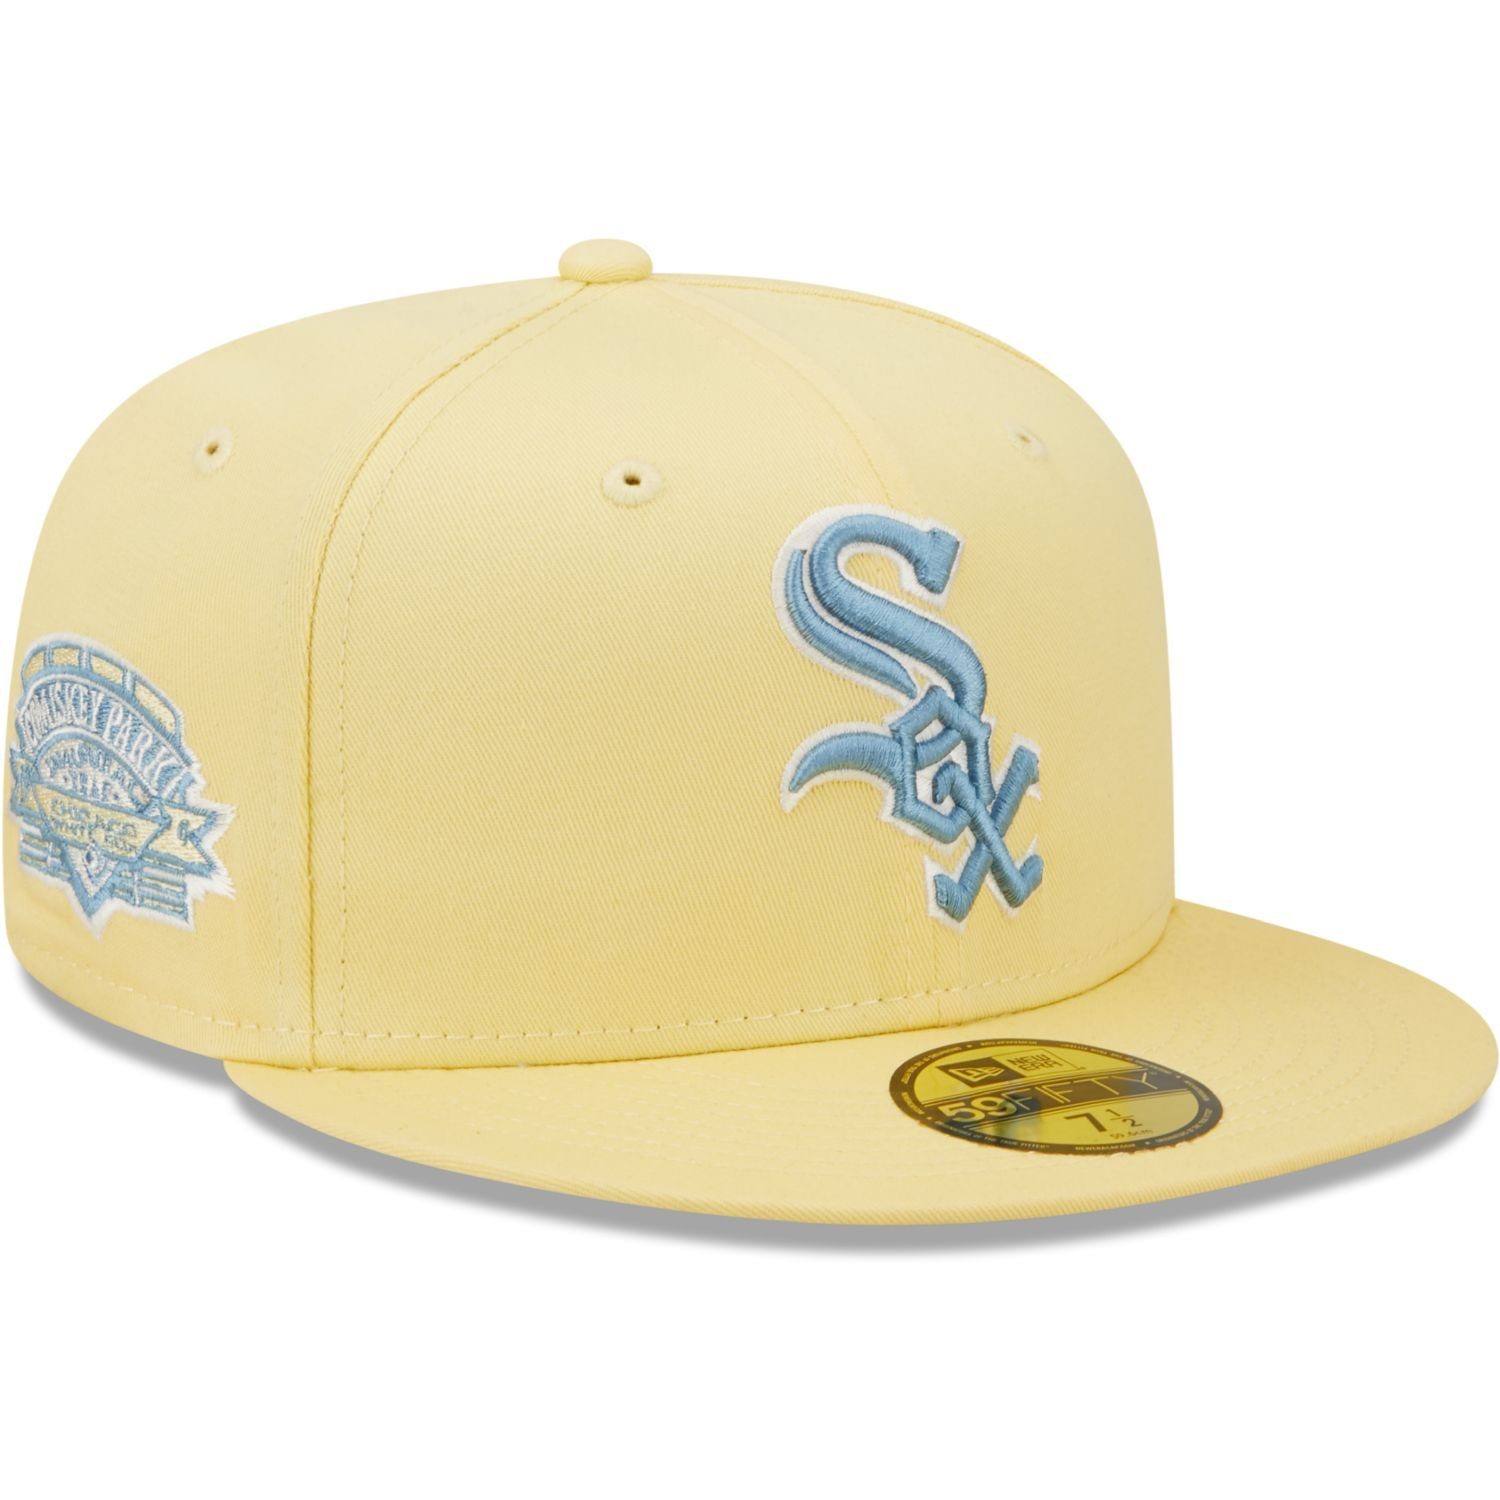 New Era White Fitted 59Fifty Sox COOPERSTOWN Cap Chicago